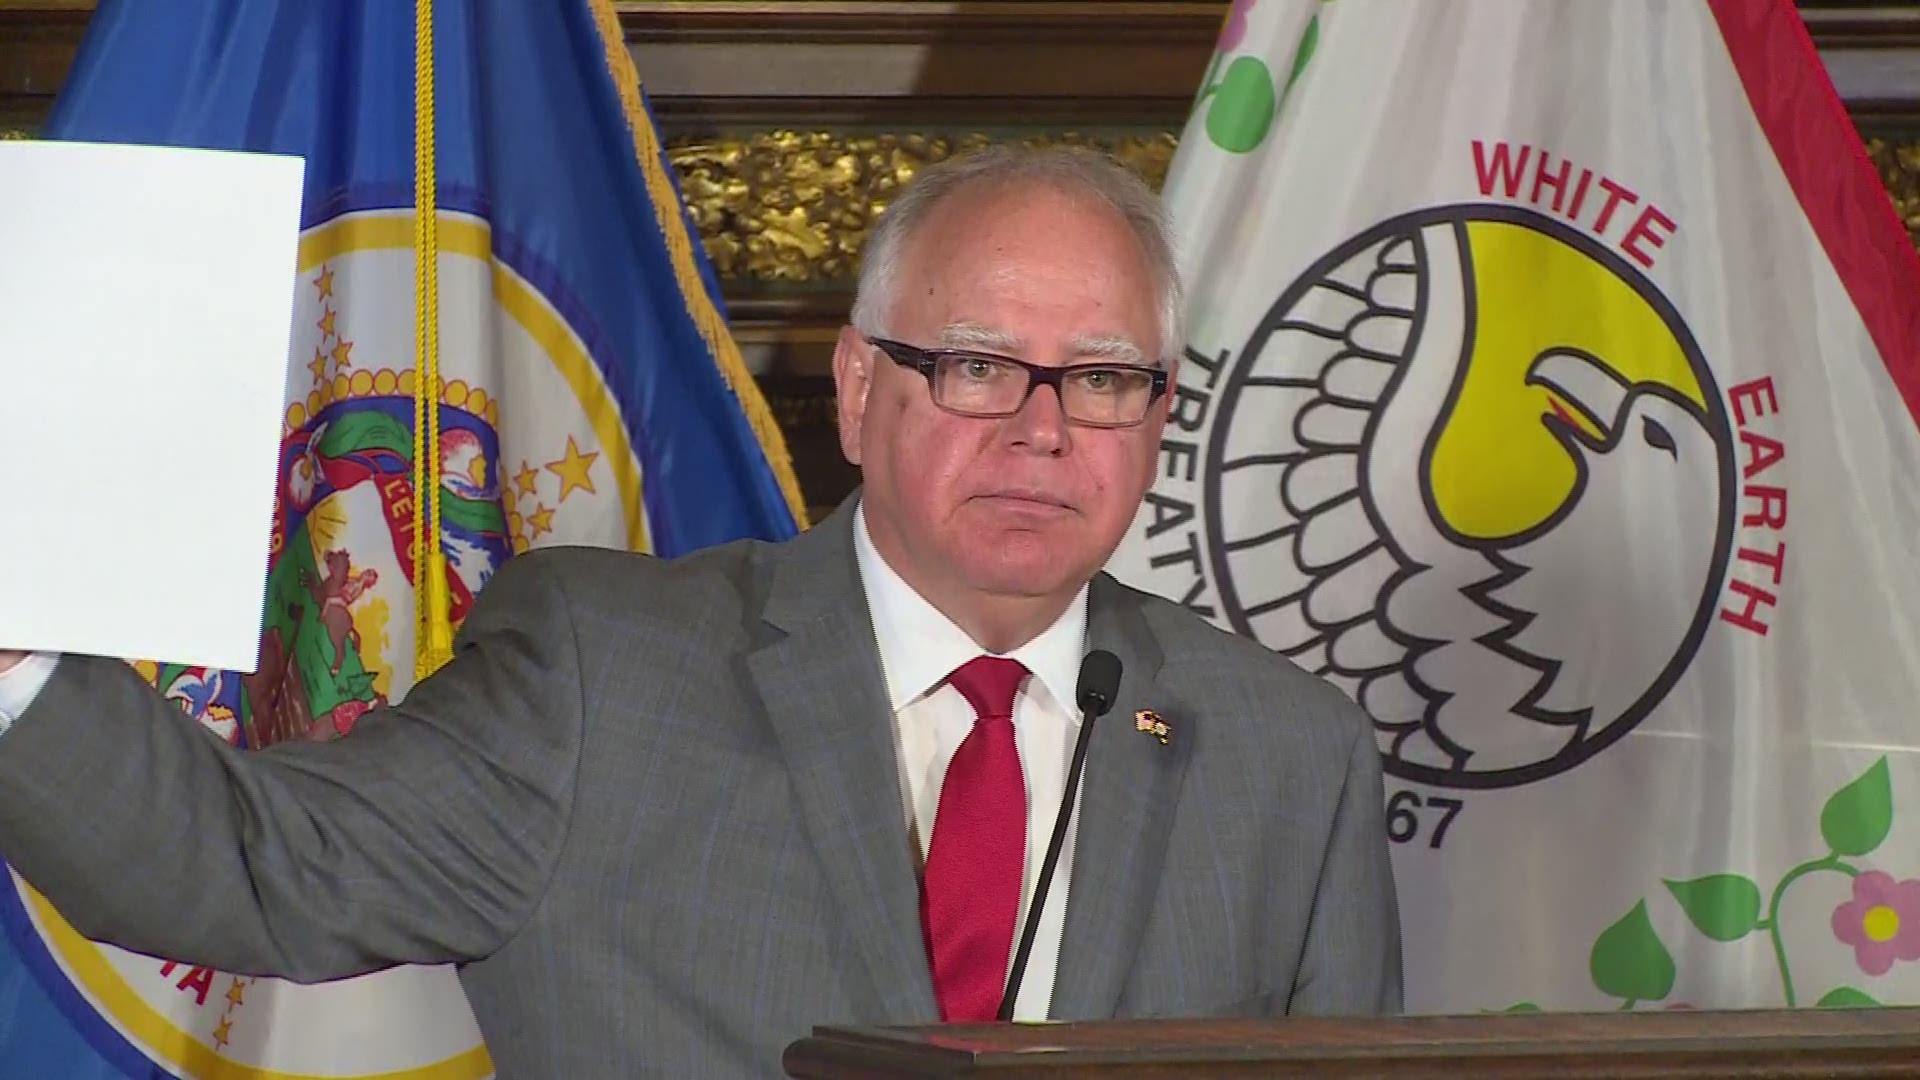 Gov. Walz is calling on Senate Republicans to hold interim hearings on gun reform measures such as universal background checks and red flag extreme risk protection orders. Those measures passed the DFL-controlled House, but weren't heard in the Senate. Walz is also seeking hearings on the emergency insulin bill that faltered during the 2019 session. He won't call a special session unless there's agreement ahead of time.